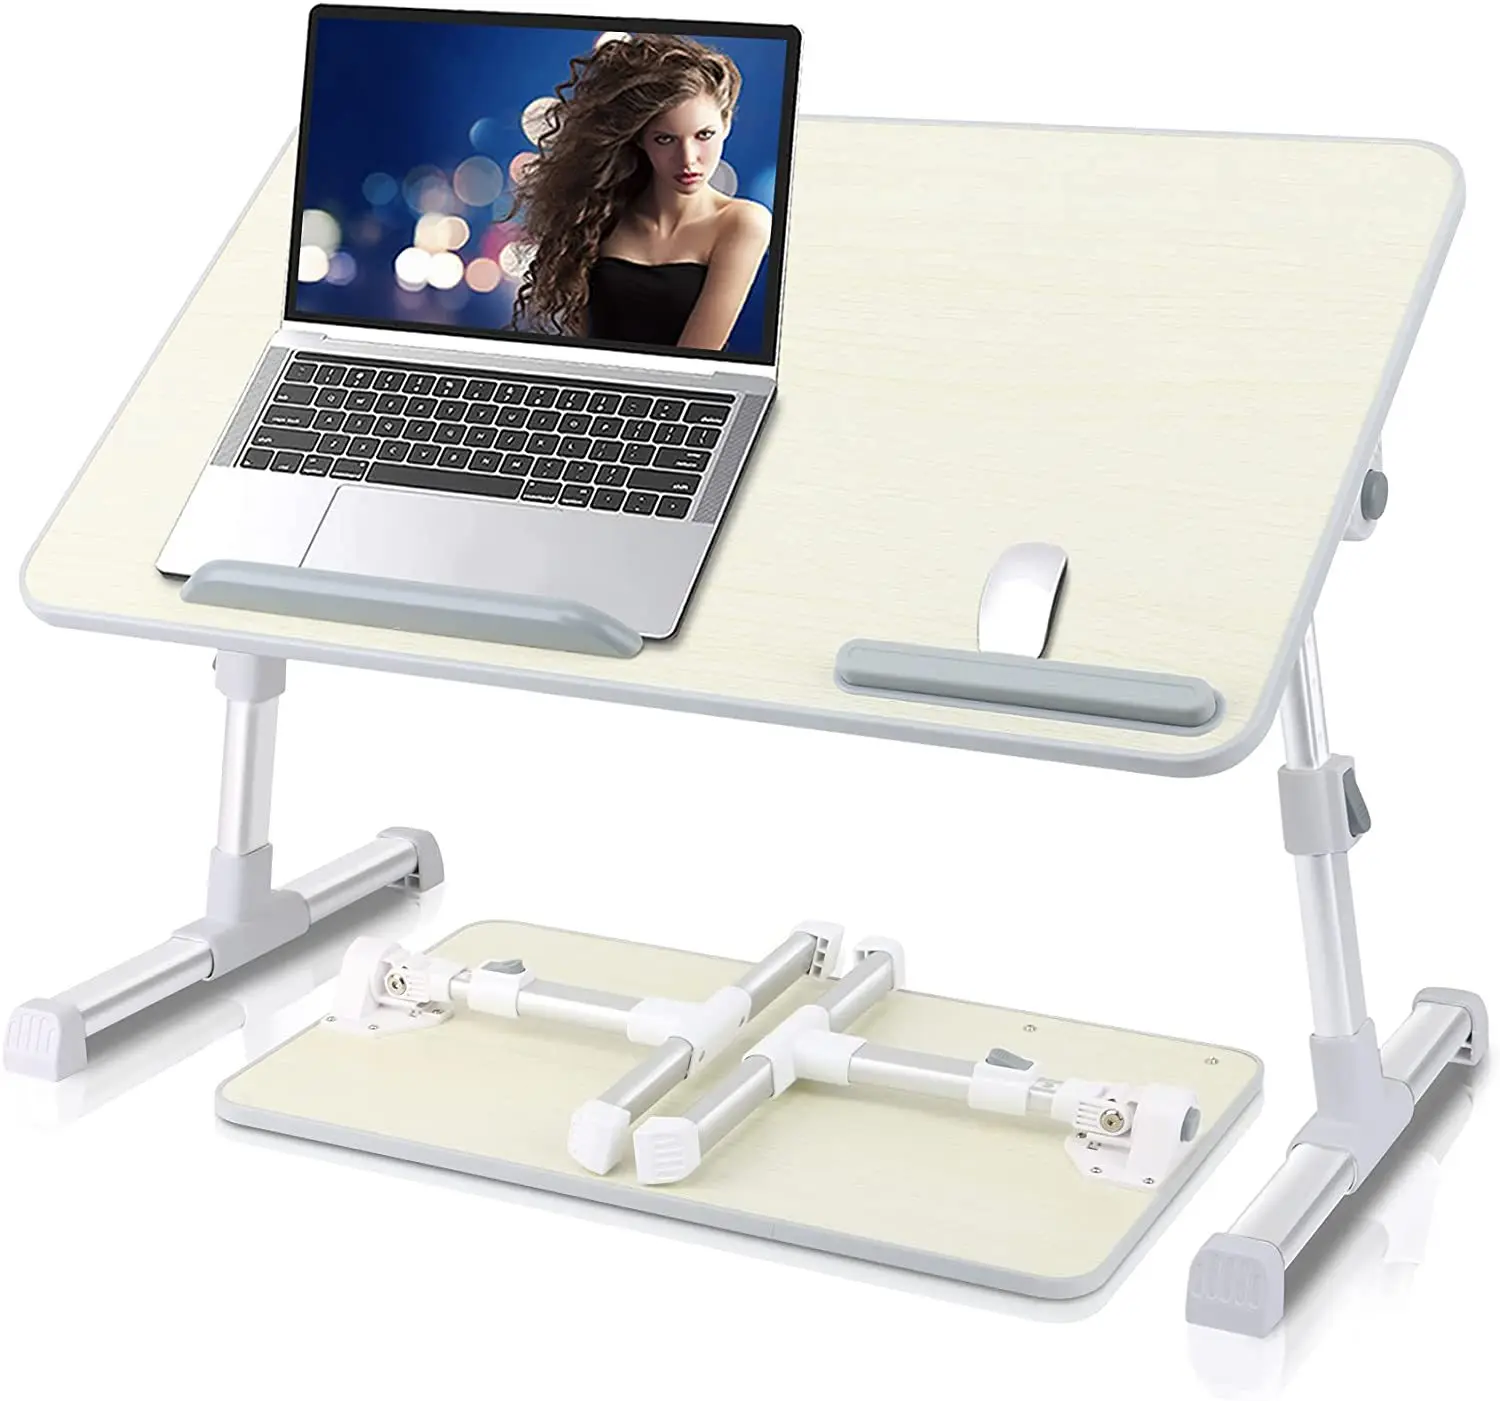 

Multi-functional Laptop Desk Portable Adjustable Laptop Stand Study Table Foldable Bed Desk for Bed Sofa Tea Serving Table Stand